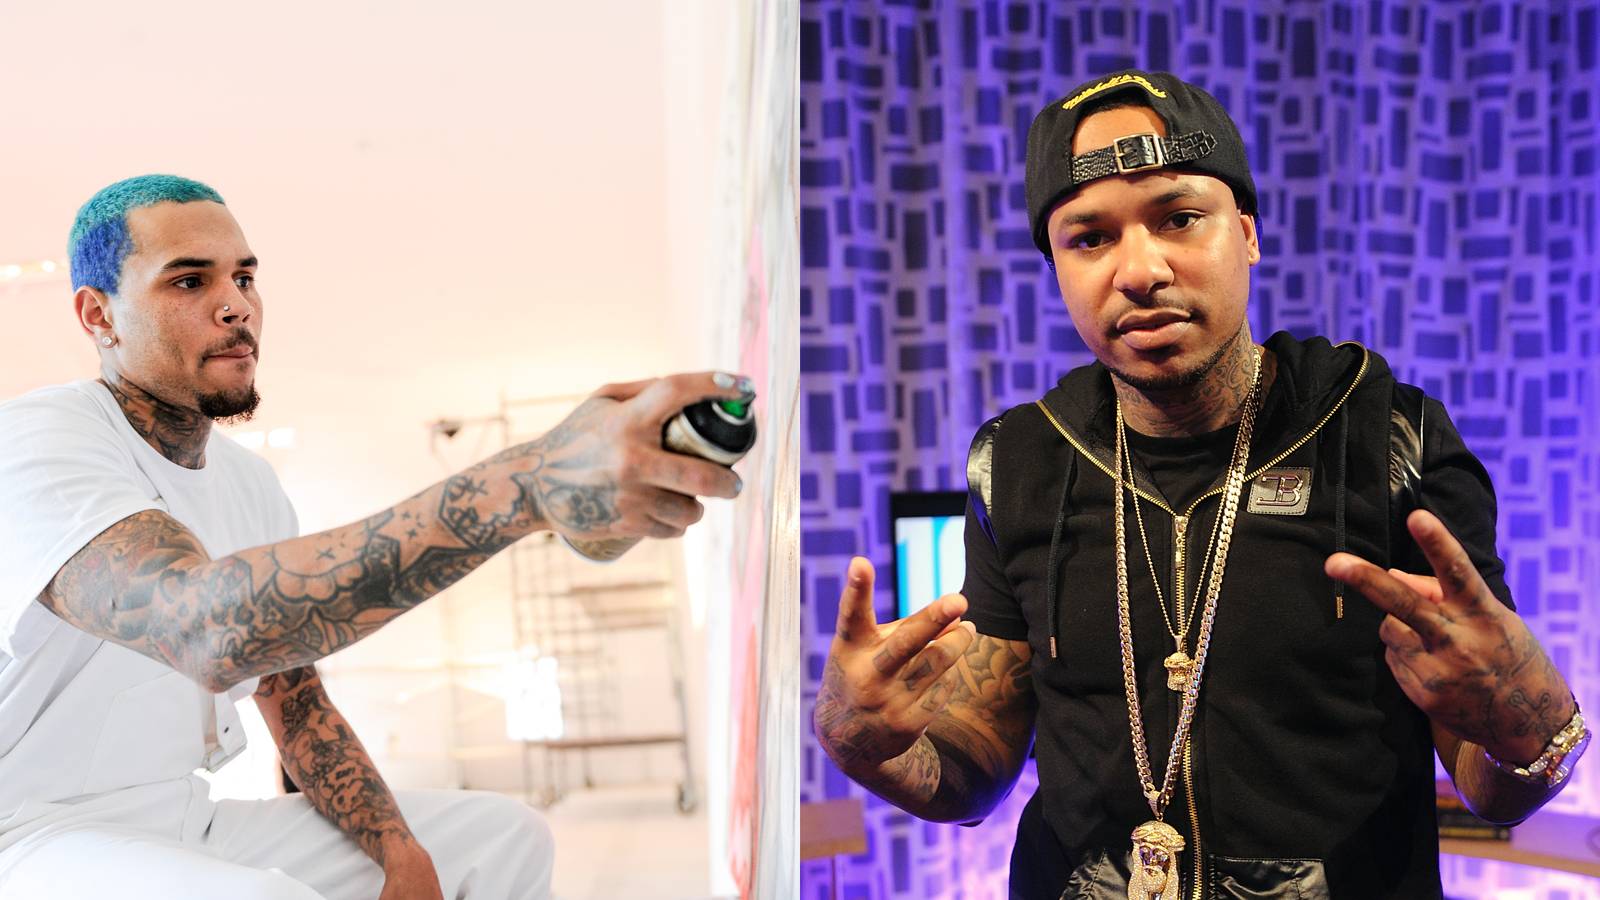 Breezy Honors Slain MC - Breezy used his painting skills to honor the memory of late Bronx MC Chinx Drugz after he was murdered earlier this year. Brown's mural featured a halo above the slain rapper's head and a smiling depiction of Chinx's good friend and frequent collaborator French Montana.&nbsp;(Photos from left: Sergi Alexander/Getty Images for Fine Art Auctions Miami, Brad Barket/Getty Images for BET)